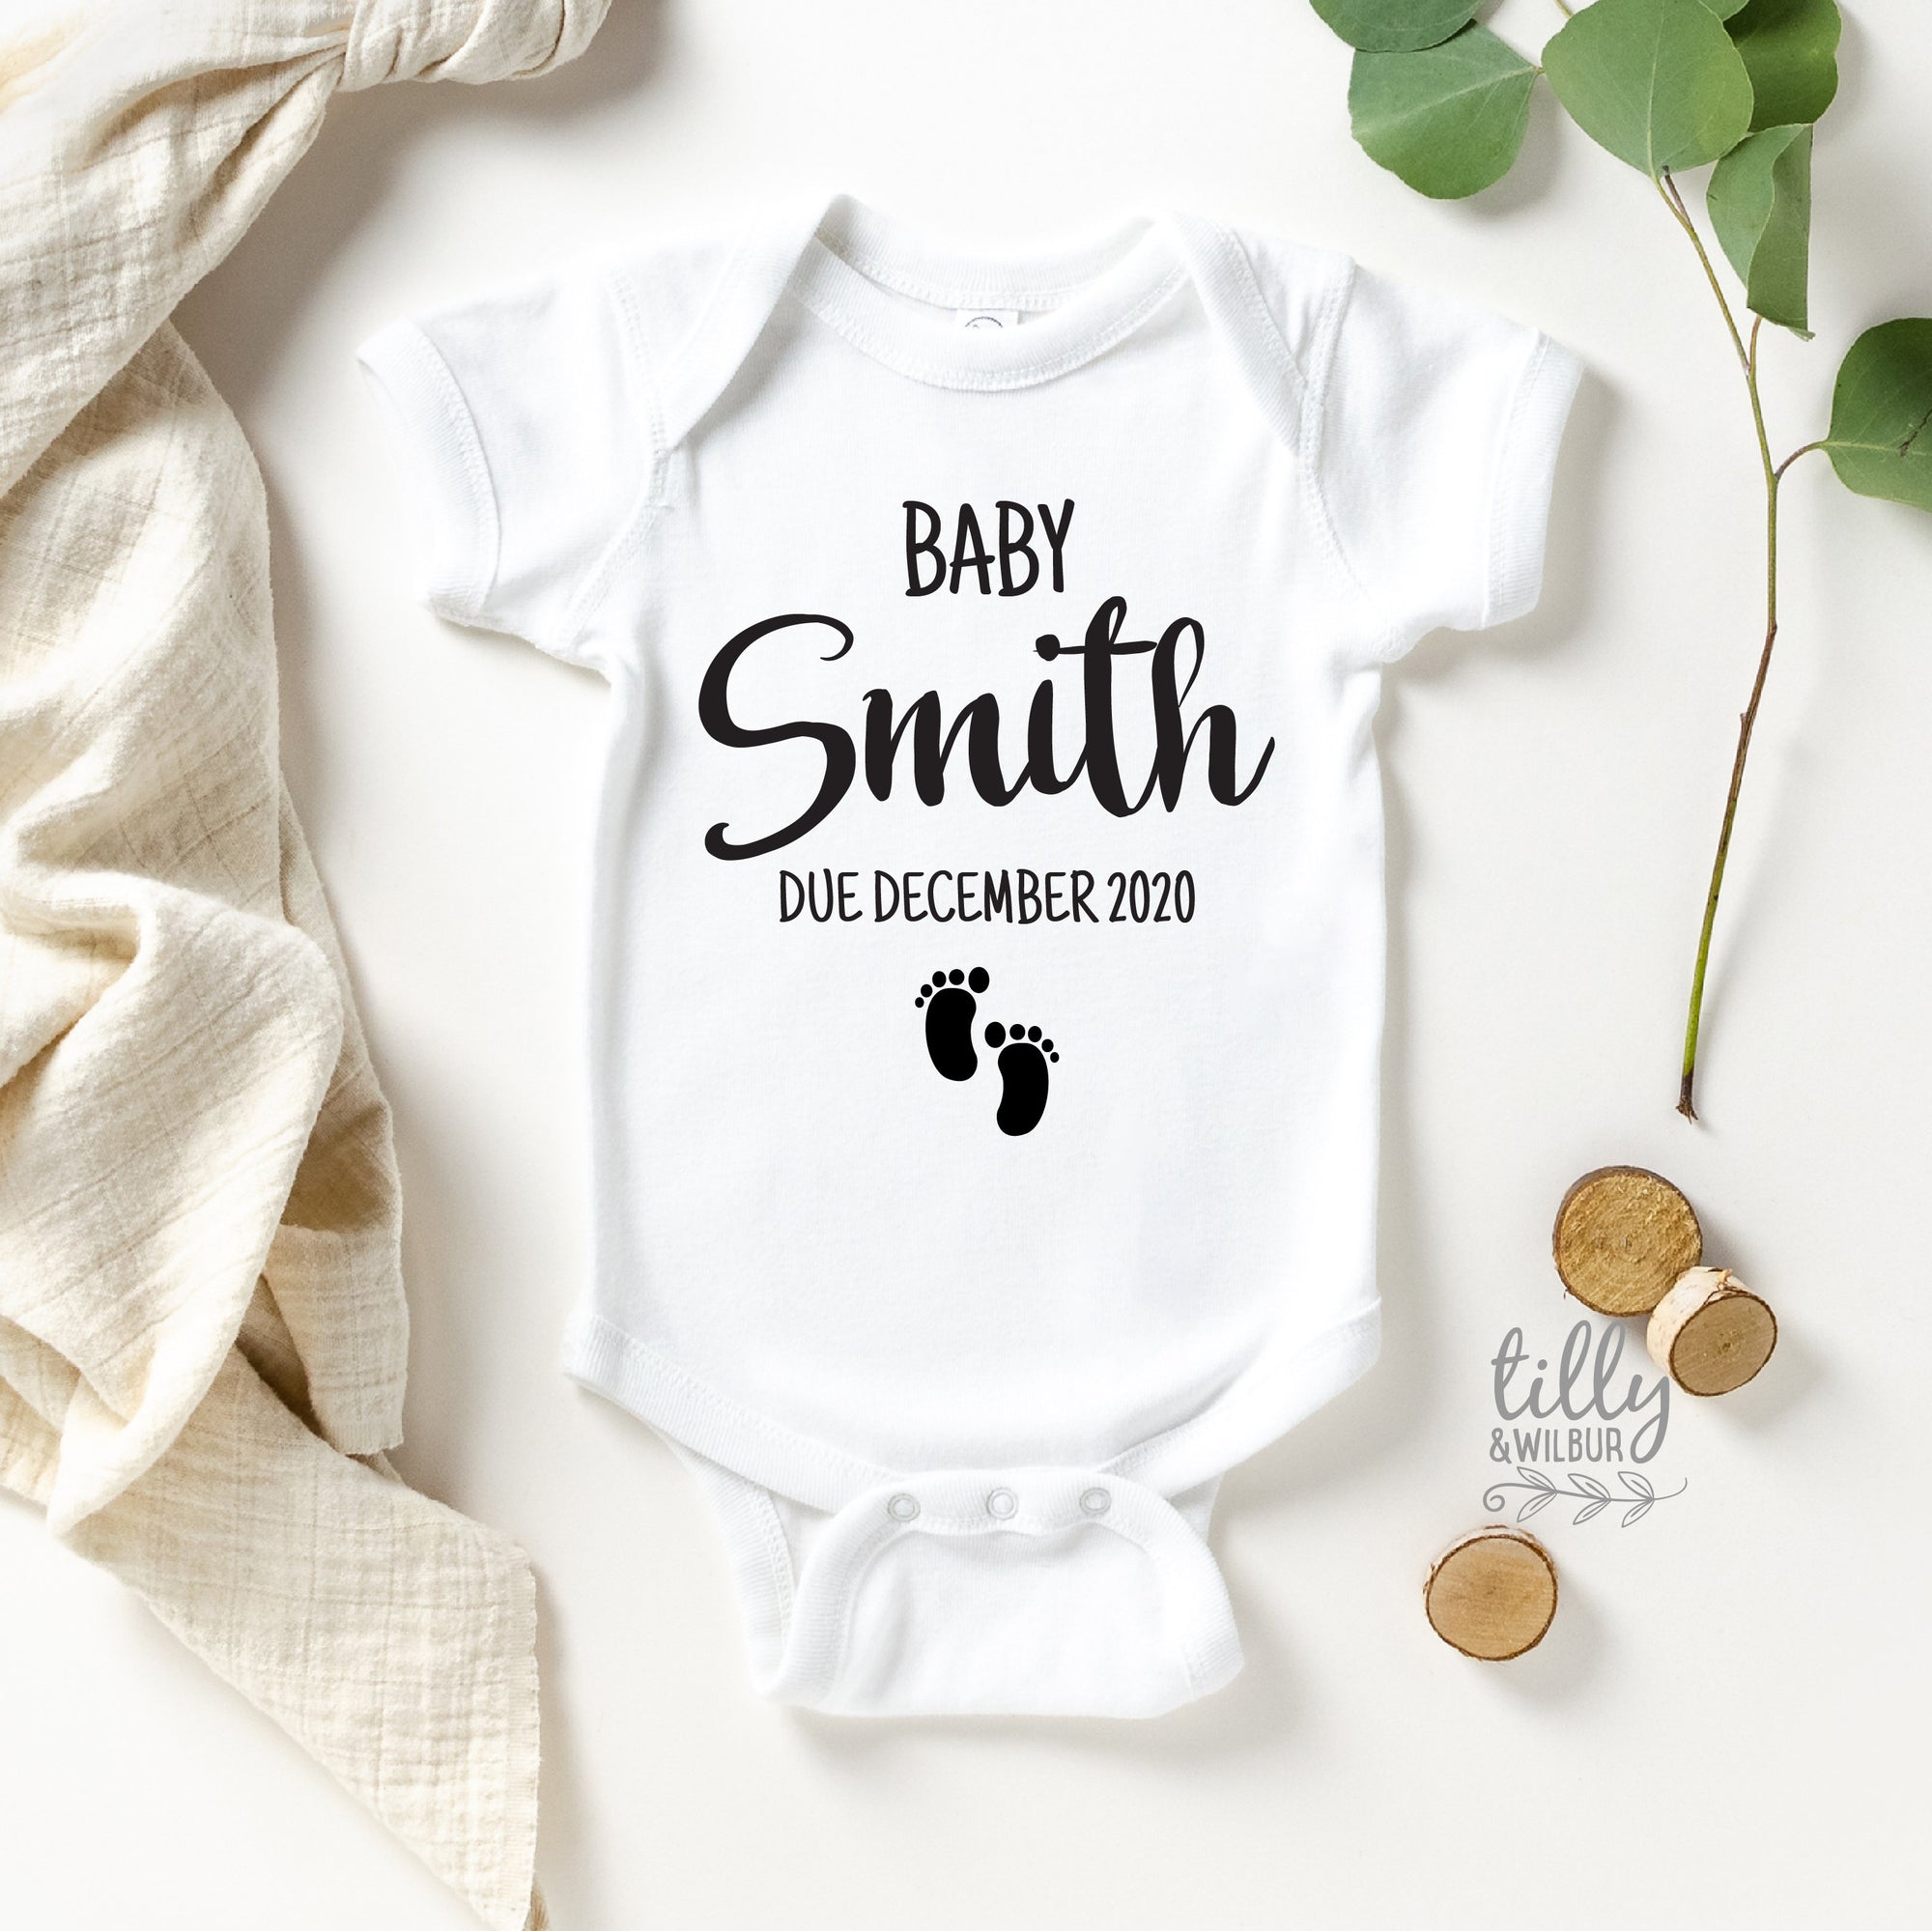 Personalised Baby Bodysuit For New Arrivals, Baby Gift, Newborn Gift, Personalised Baby Gift, Personalised Gift, Personalised Baby Clothes